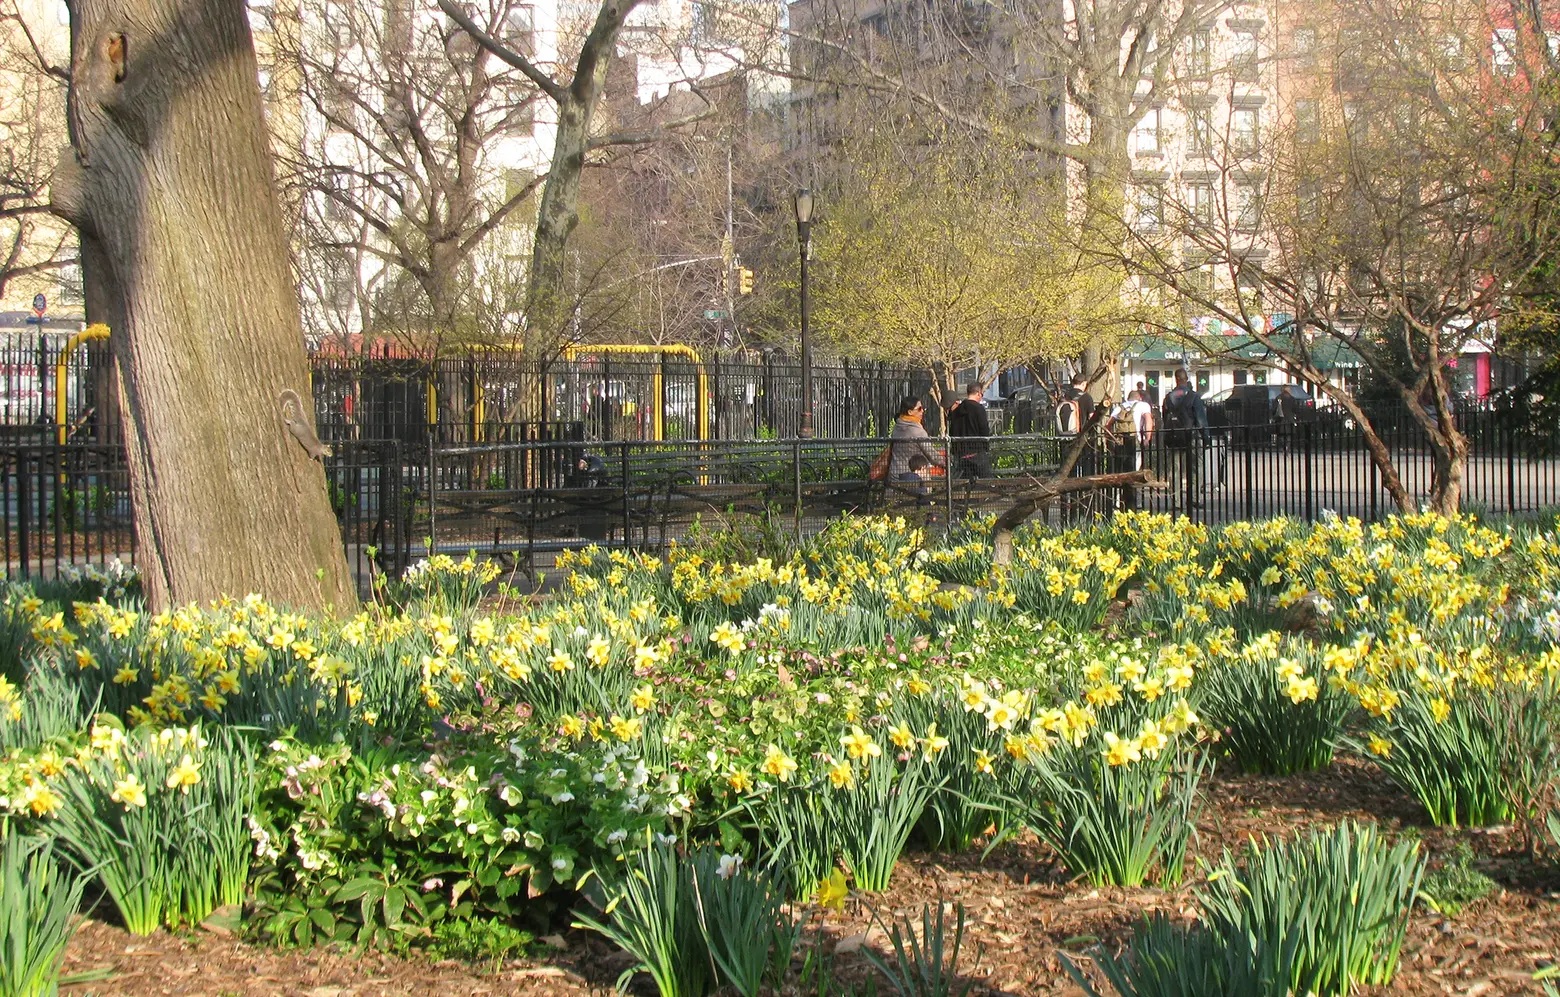 Organization honors 9/11 victims by giving away 500,000 daffodil bulbs